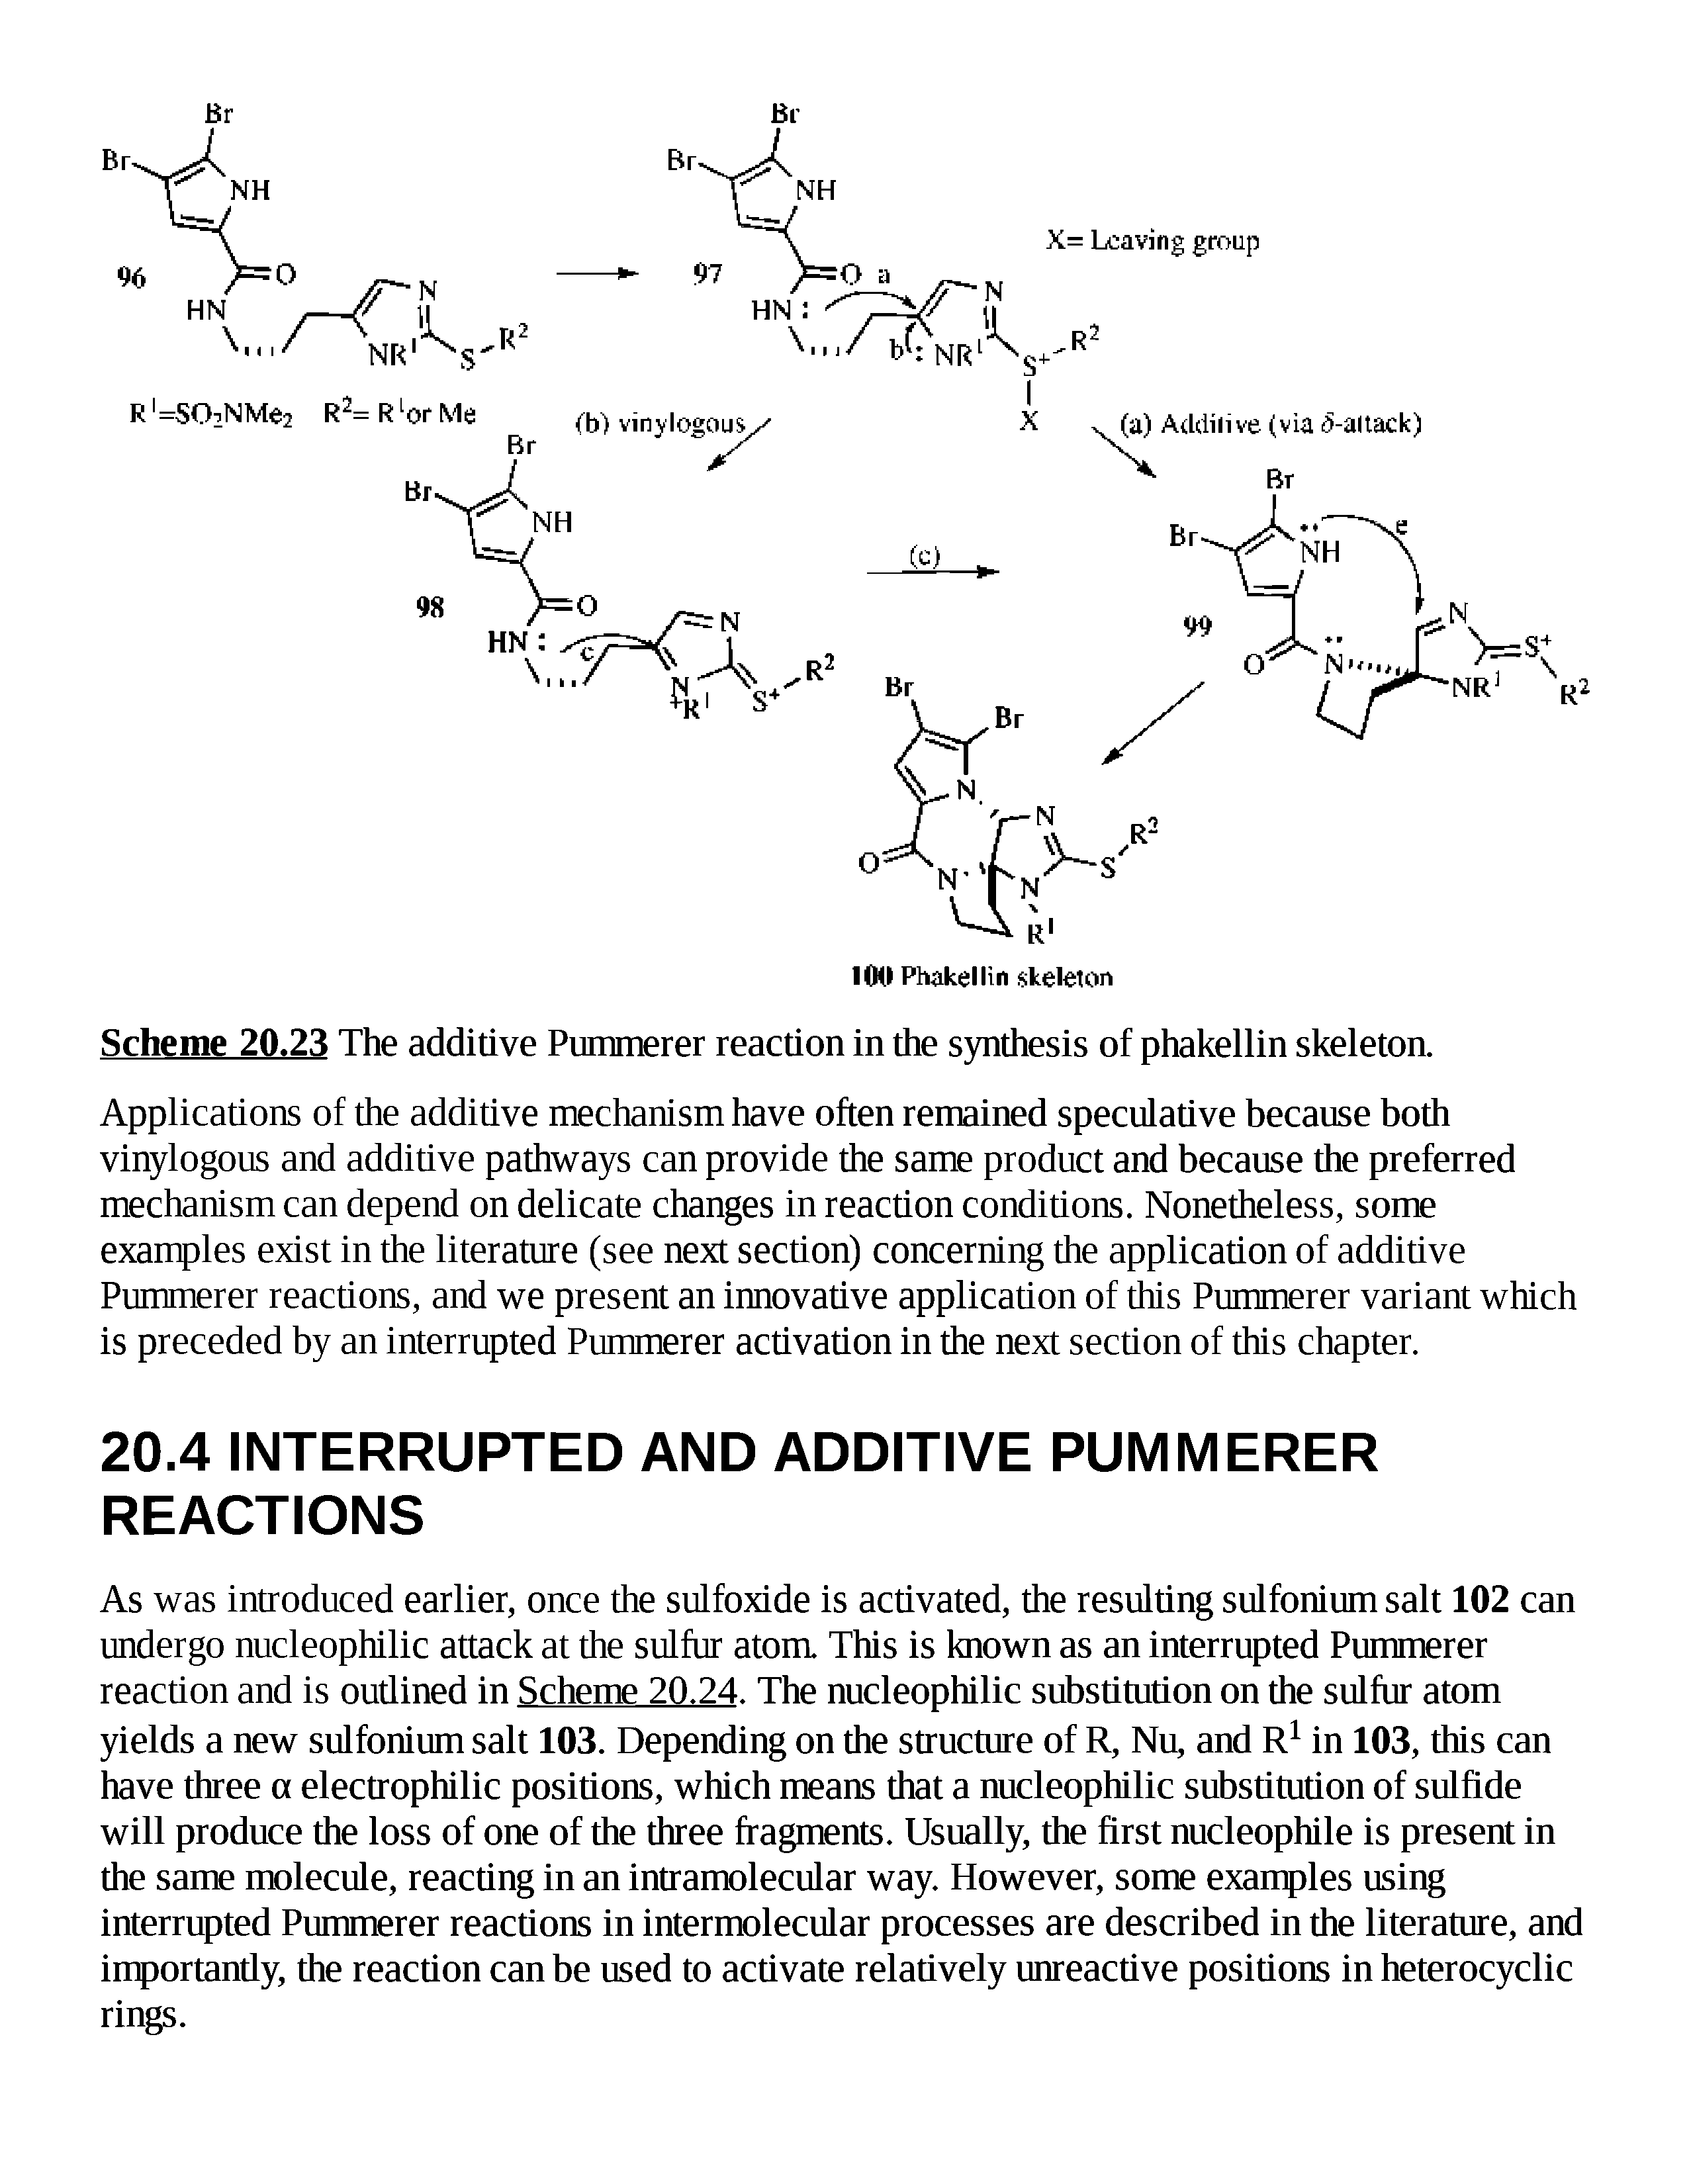 Scheme 20.23 The additive Pummerer reaction in the synthesis of phakellin skeleton.